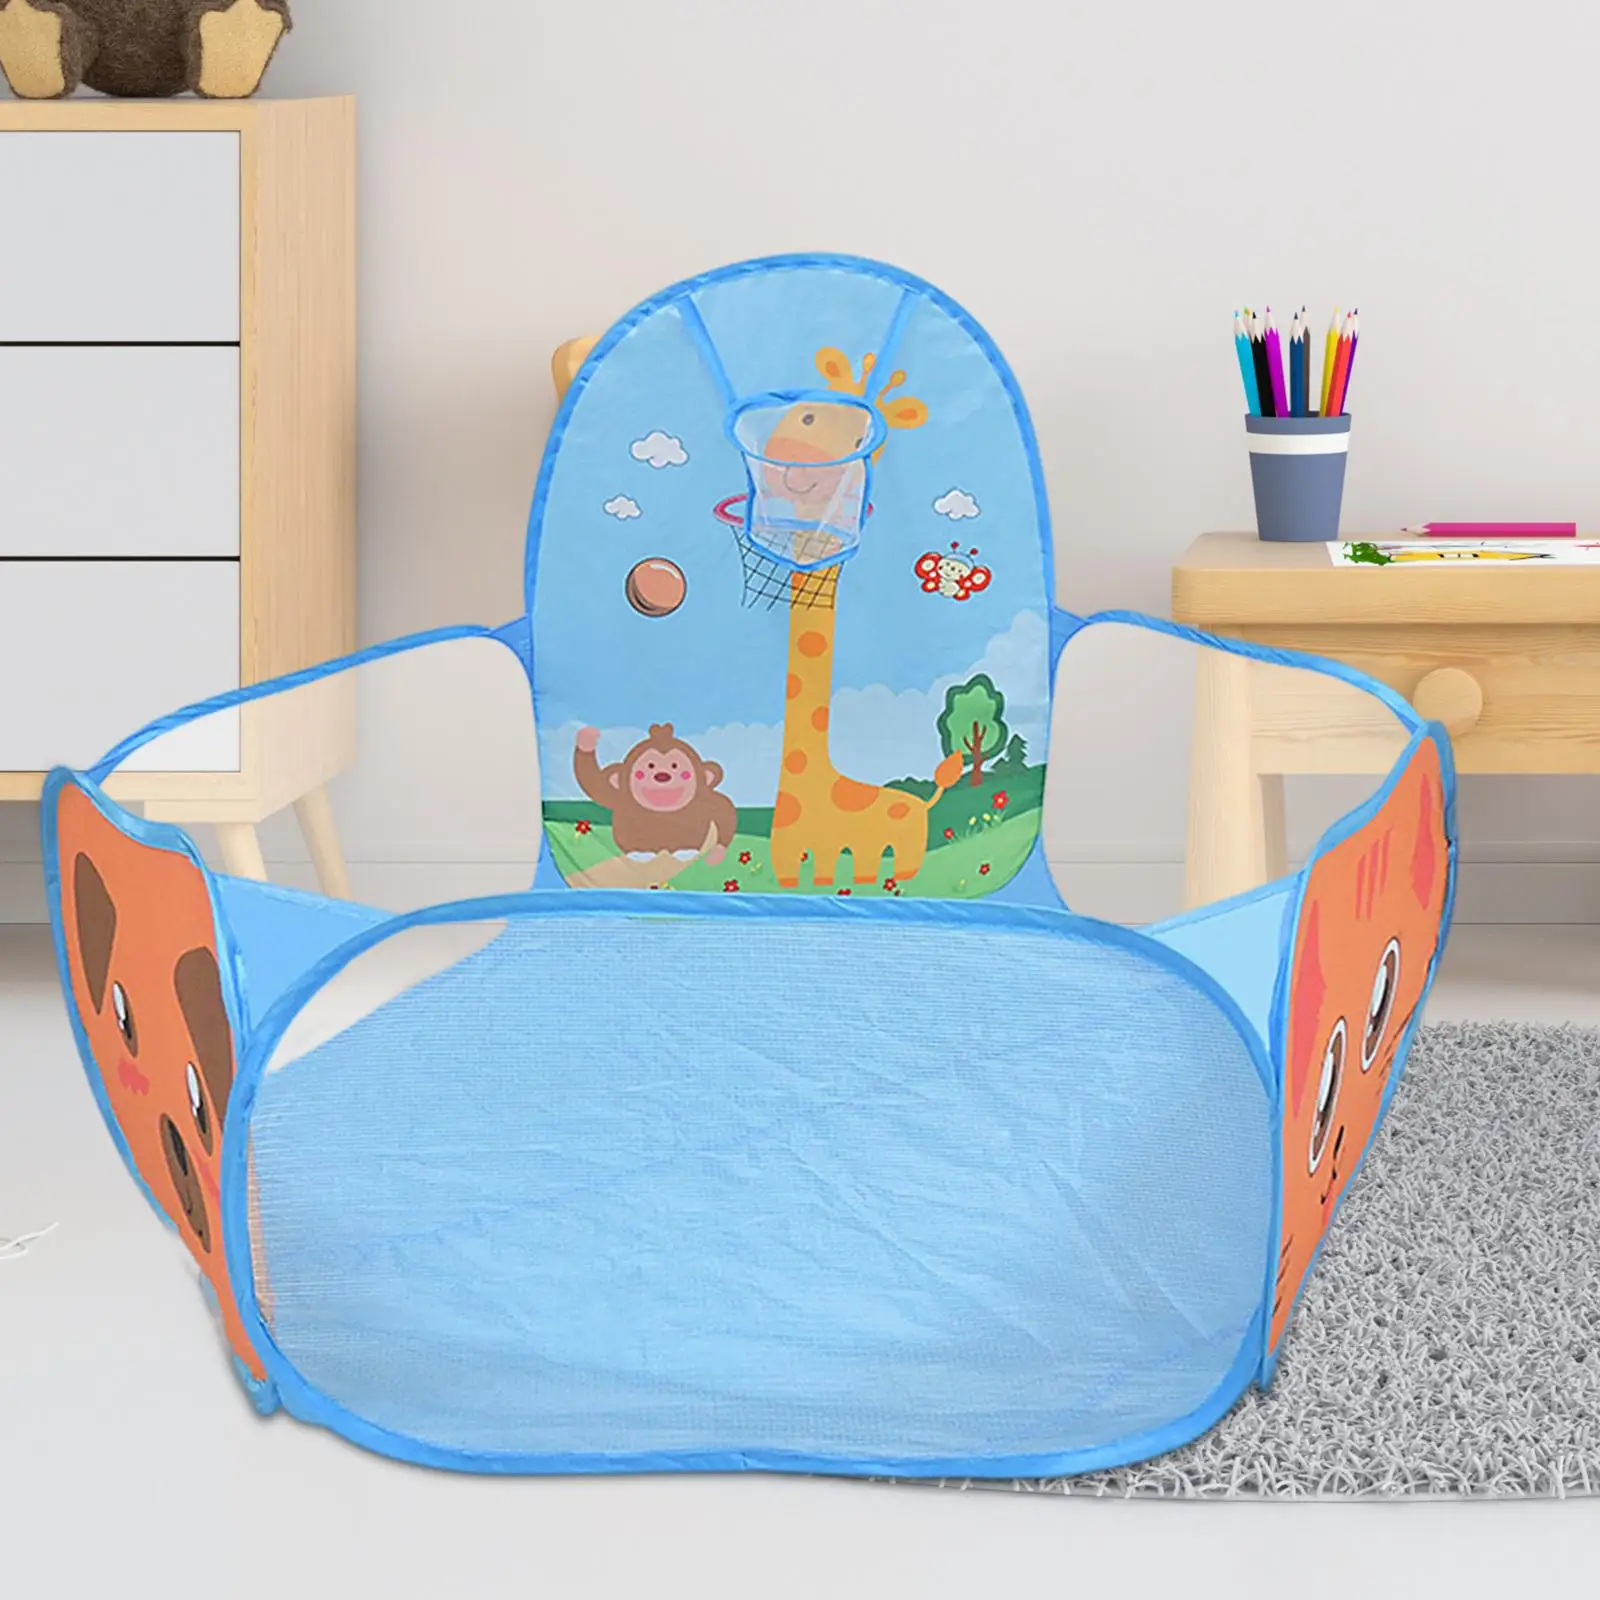 Kids Play Tent Indoor Portable Fence Toddles Tent Easy Assemble Child Room Decor Folding for Children Boys Kids Toddlers Girls